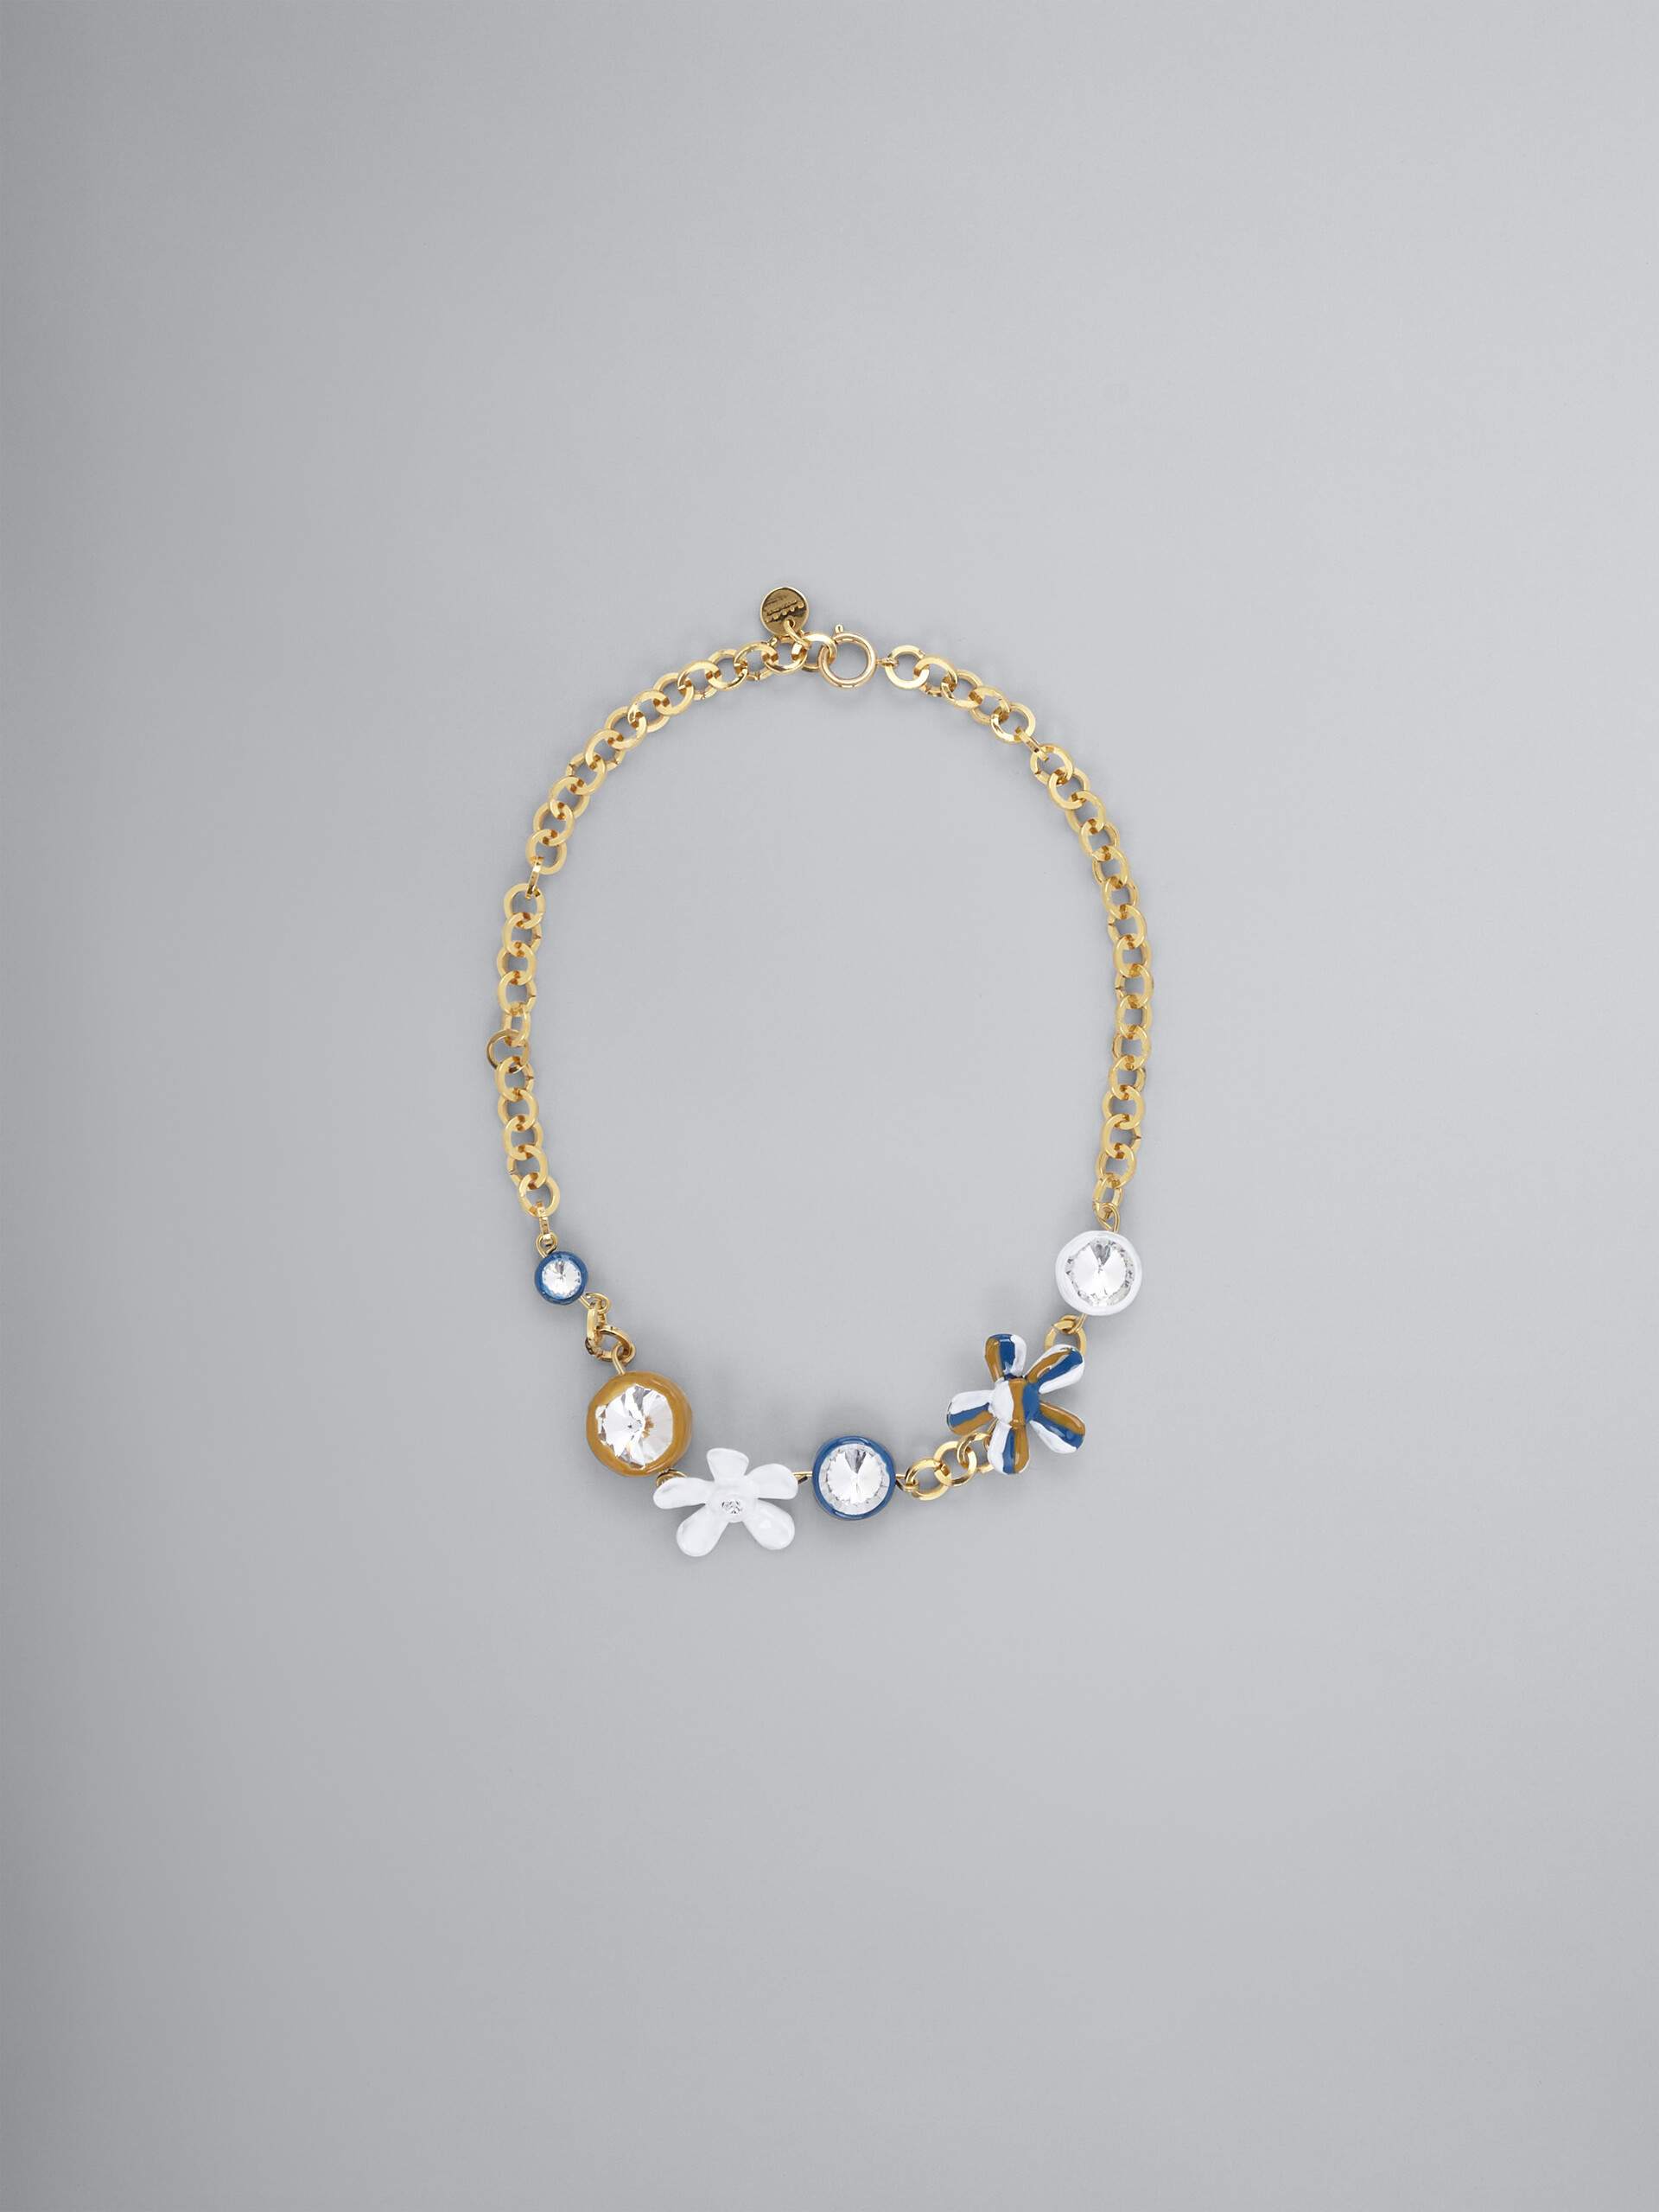 DAISY white and blue necklace - Necklaces - Image 1